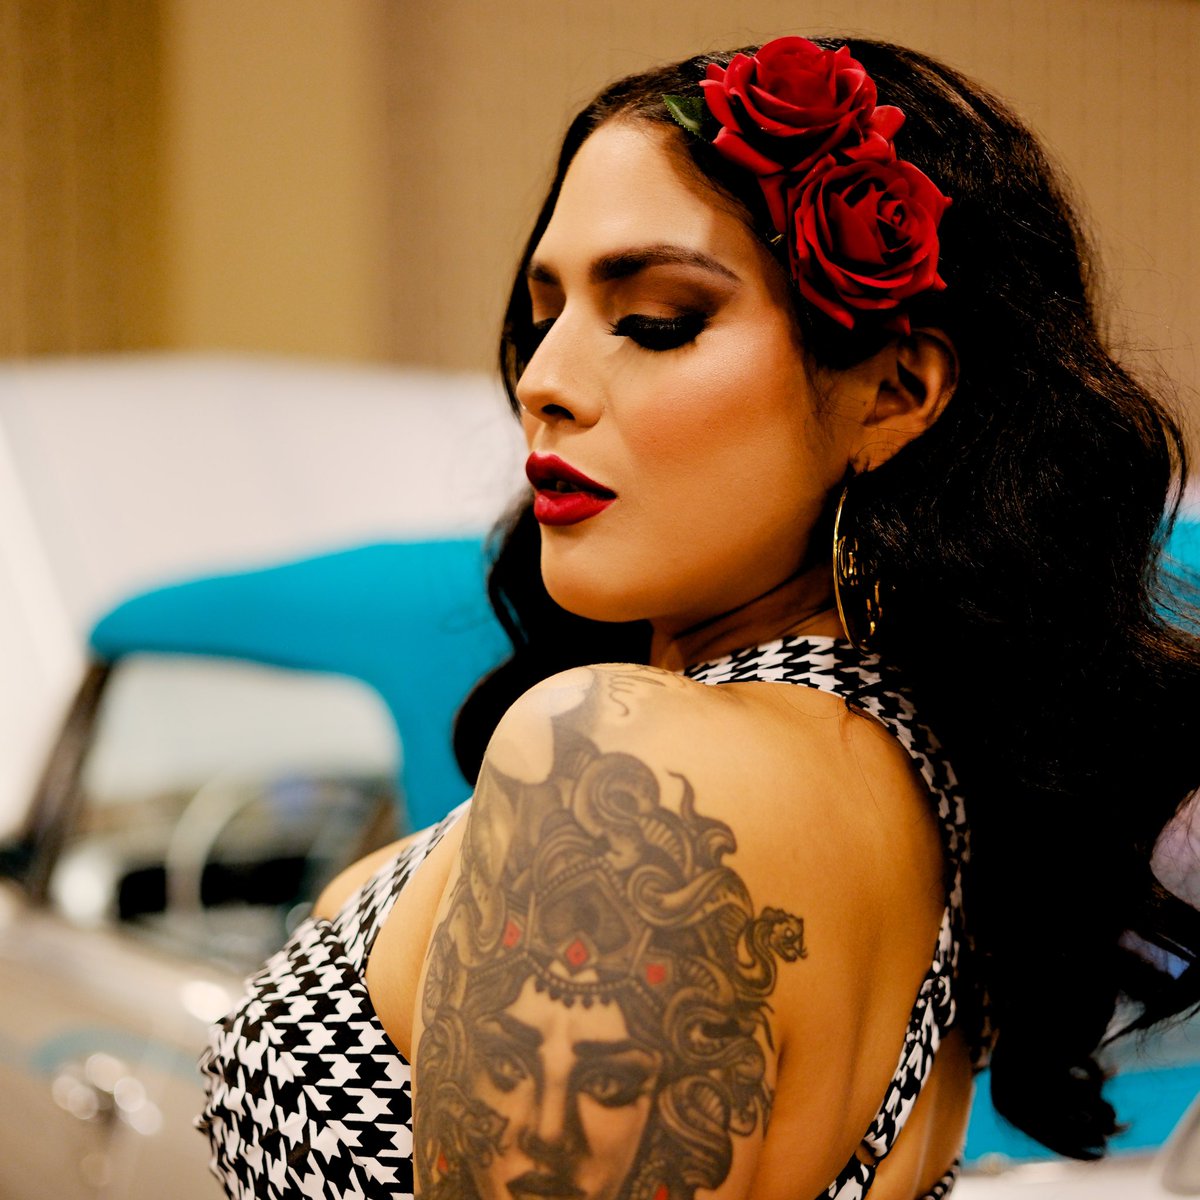 A sample from the Austin Lowriding Super Show #fujifilm #photography #fujiXT5 #XF18mmf14 #lowriders